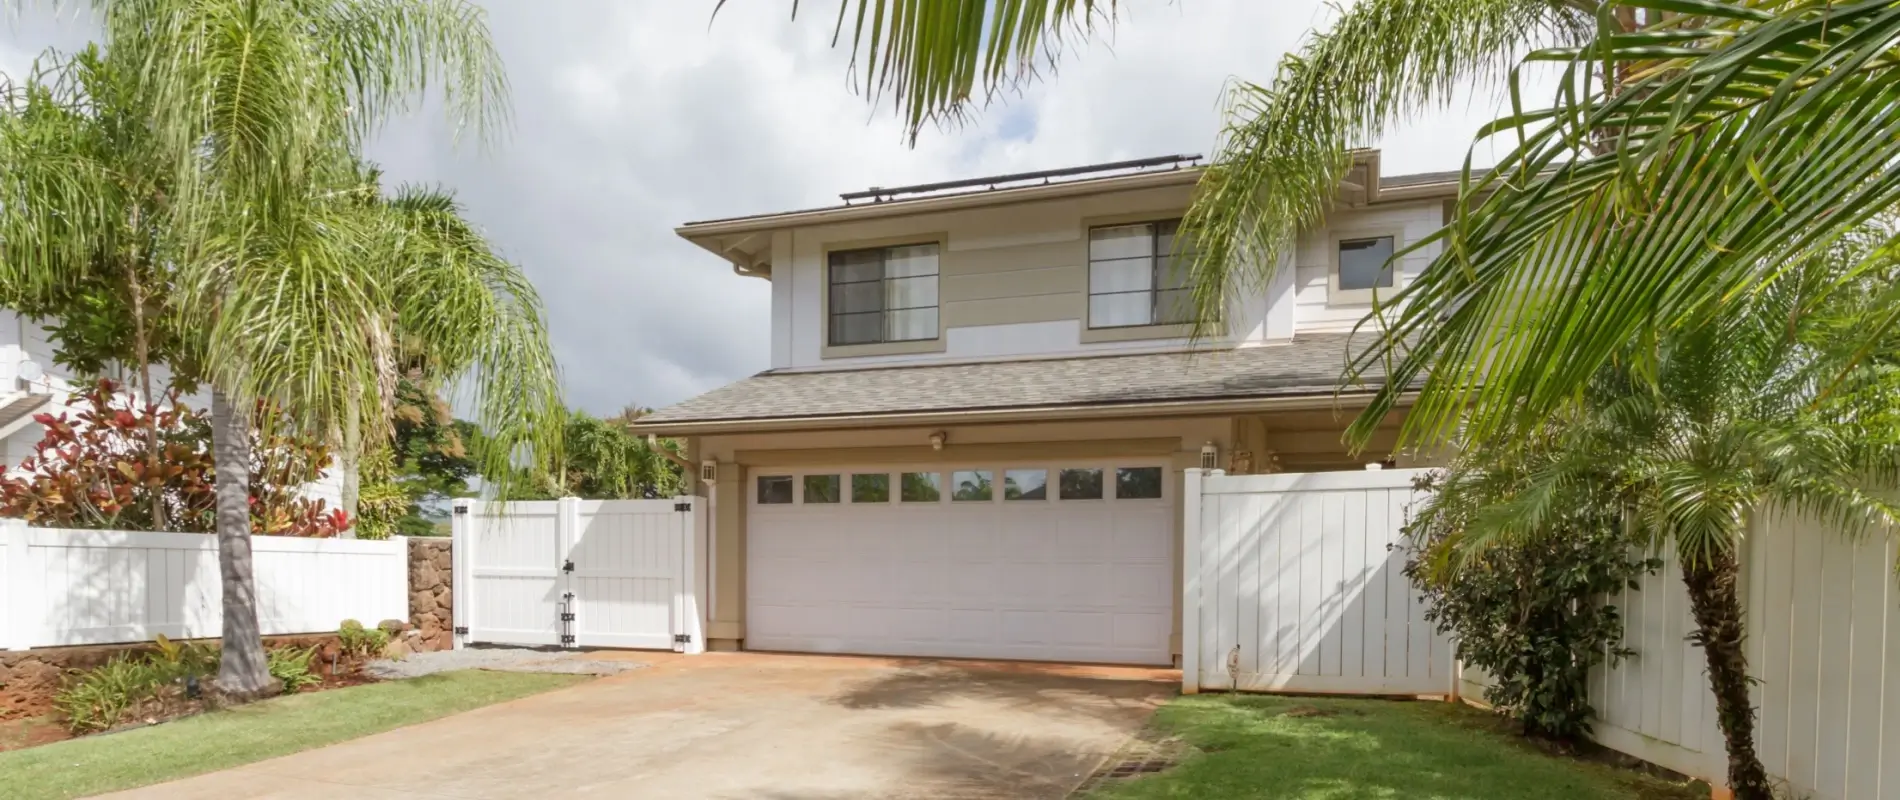 Background image for eMortgage Hawaii 763350